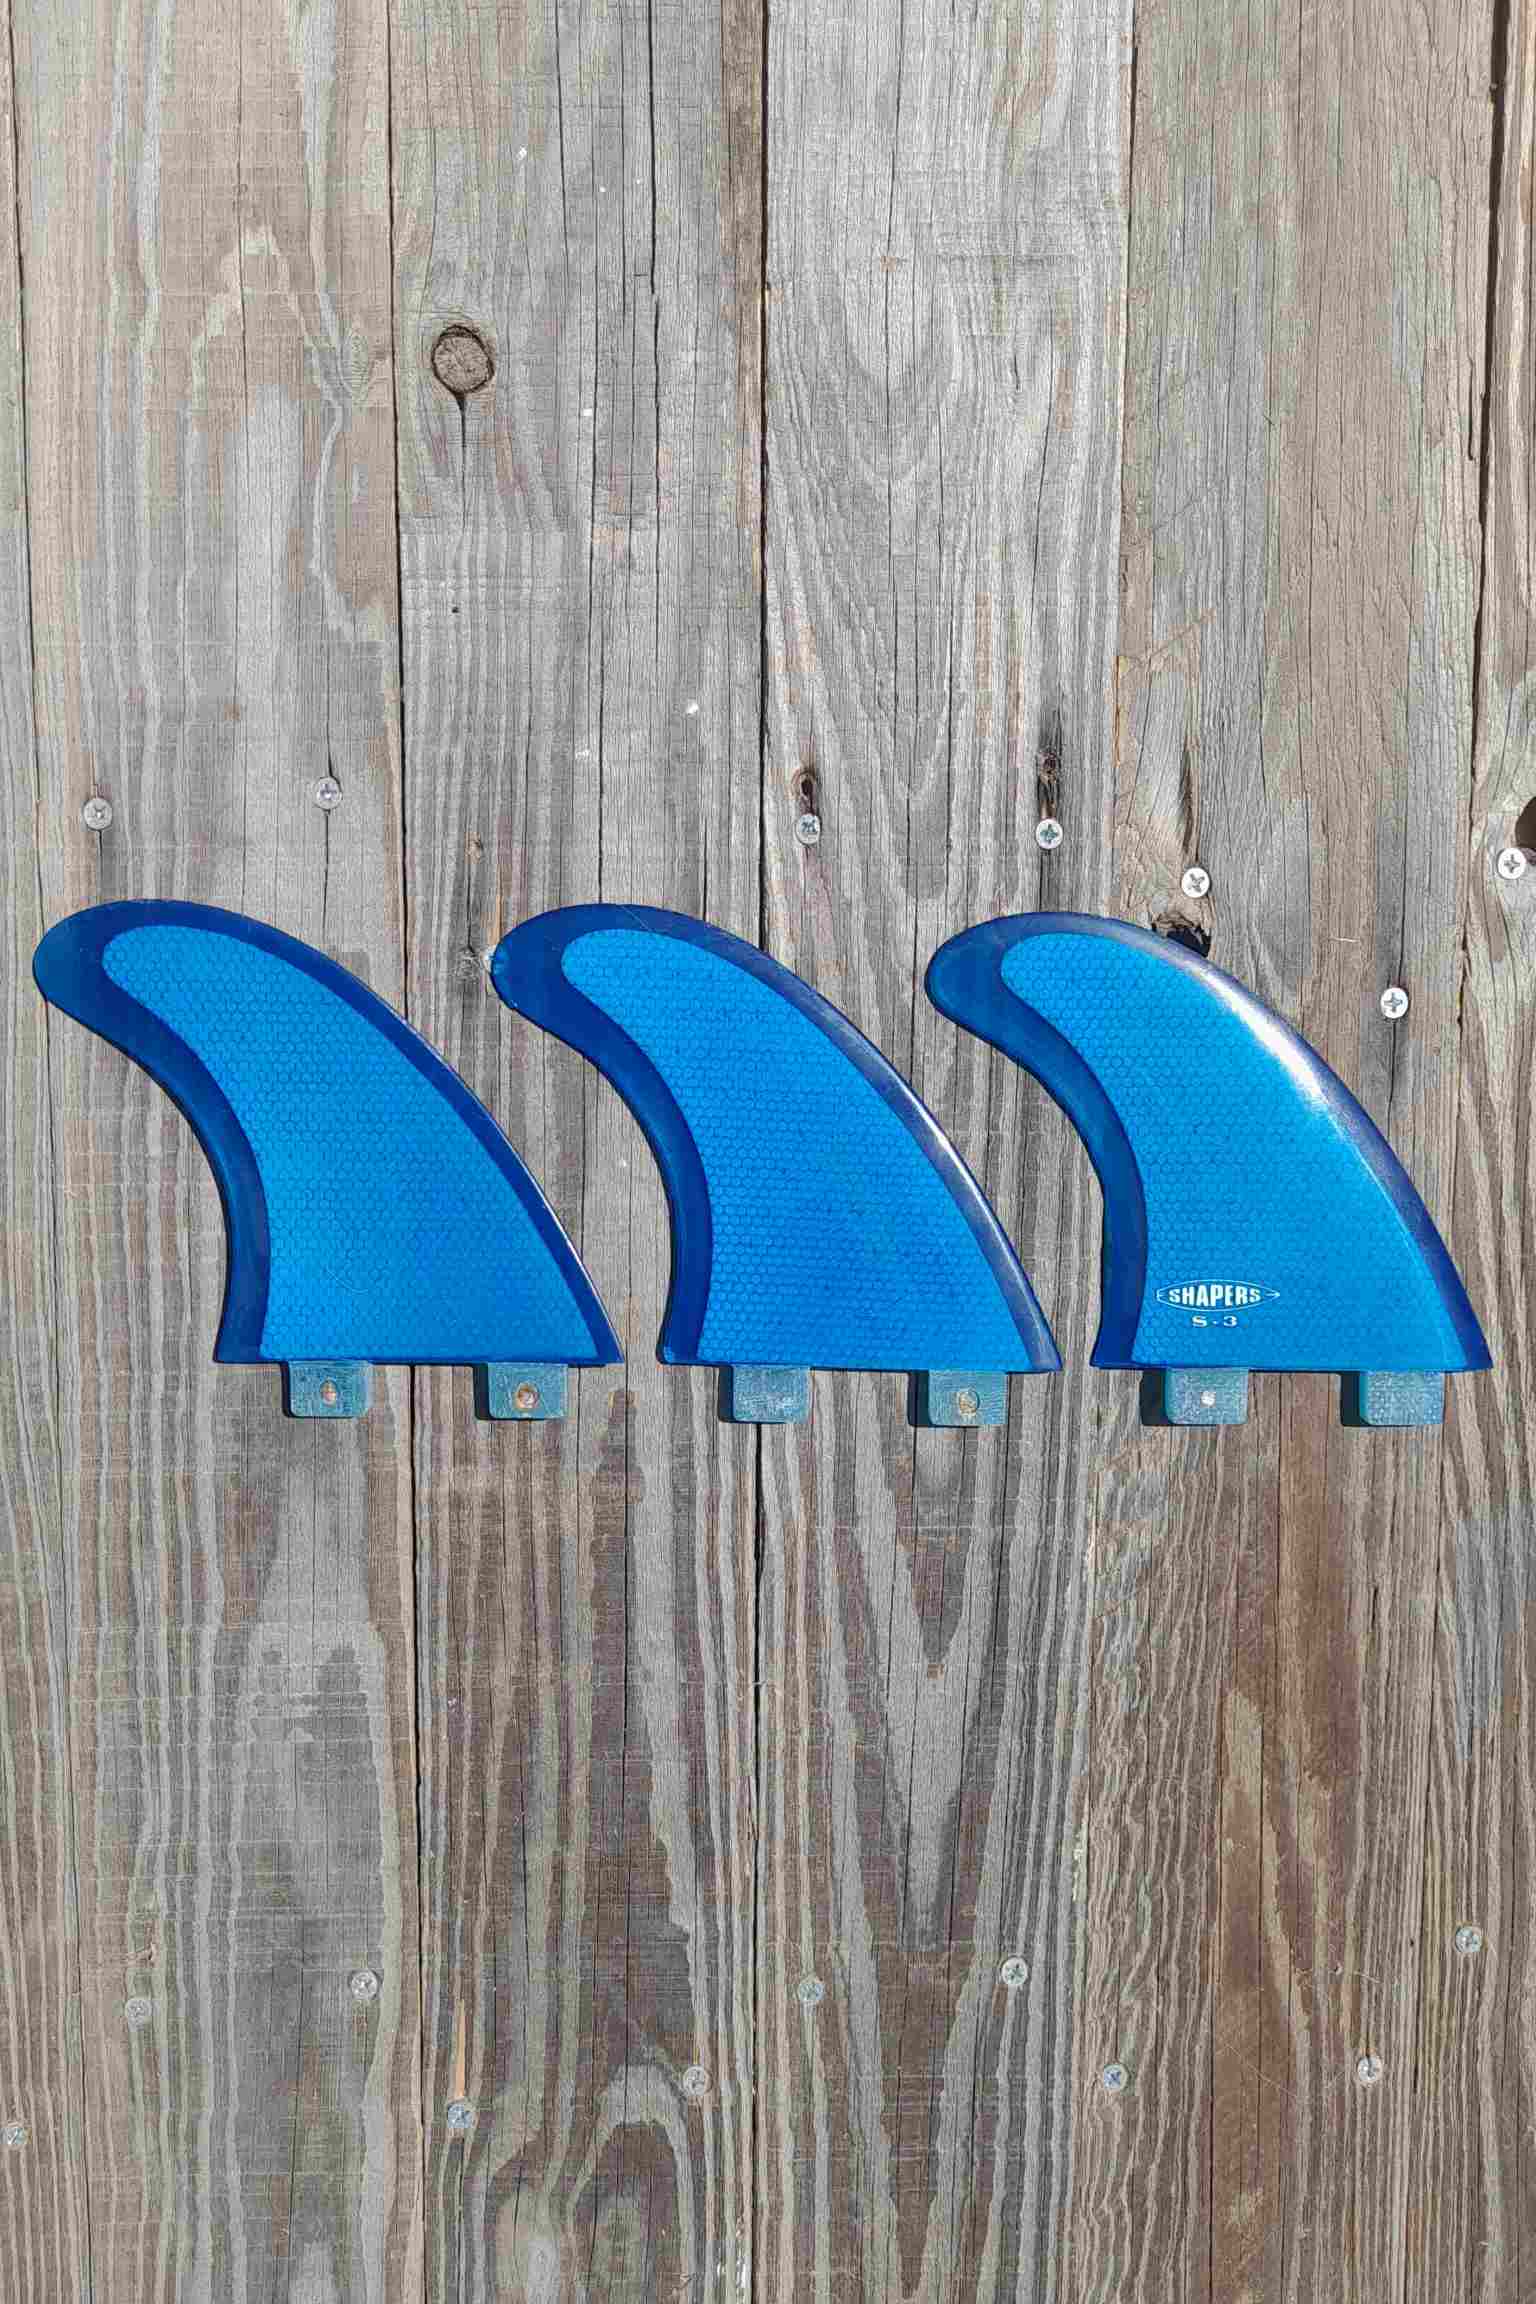 Z Sold – FINS – SHAPERS – S-3 Thruster Set